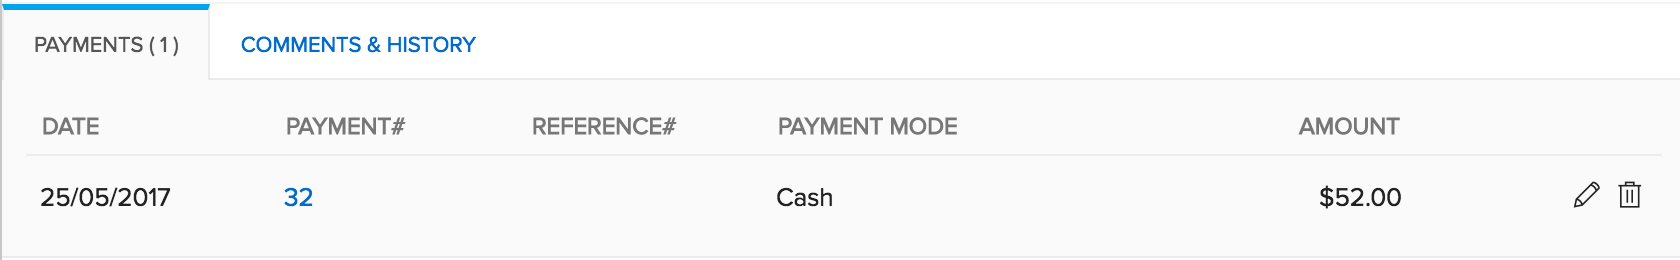 Image of the payments received tab